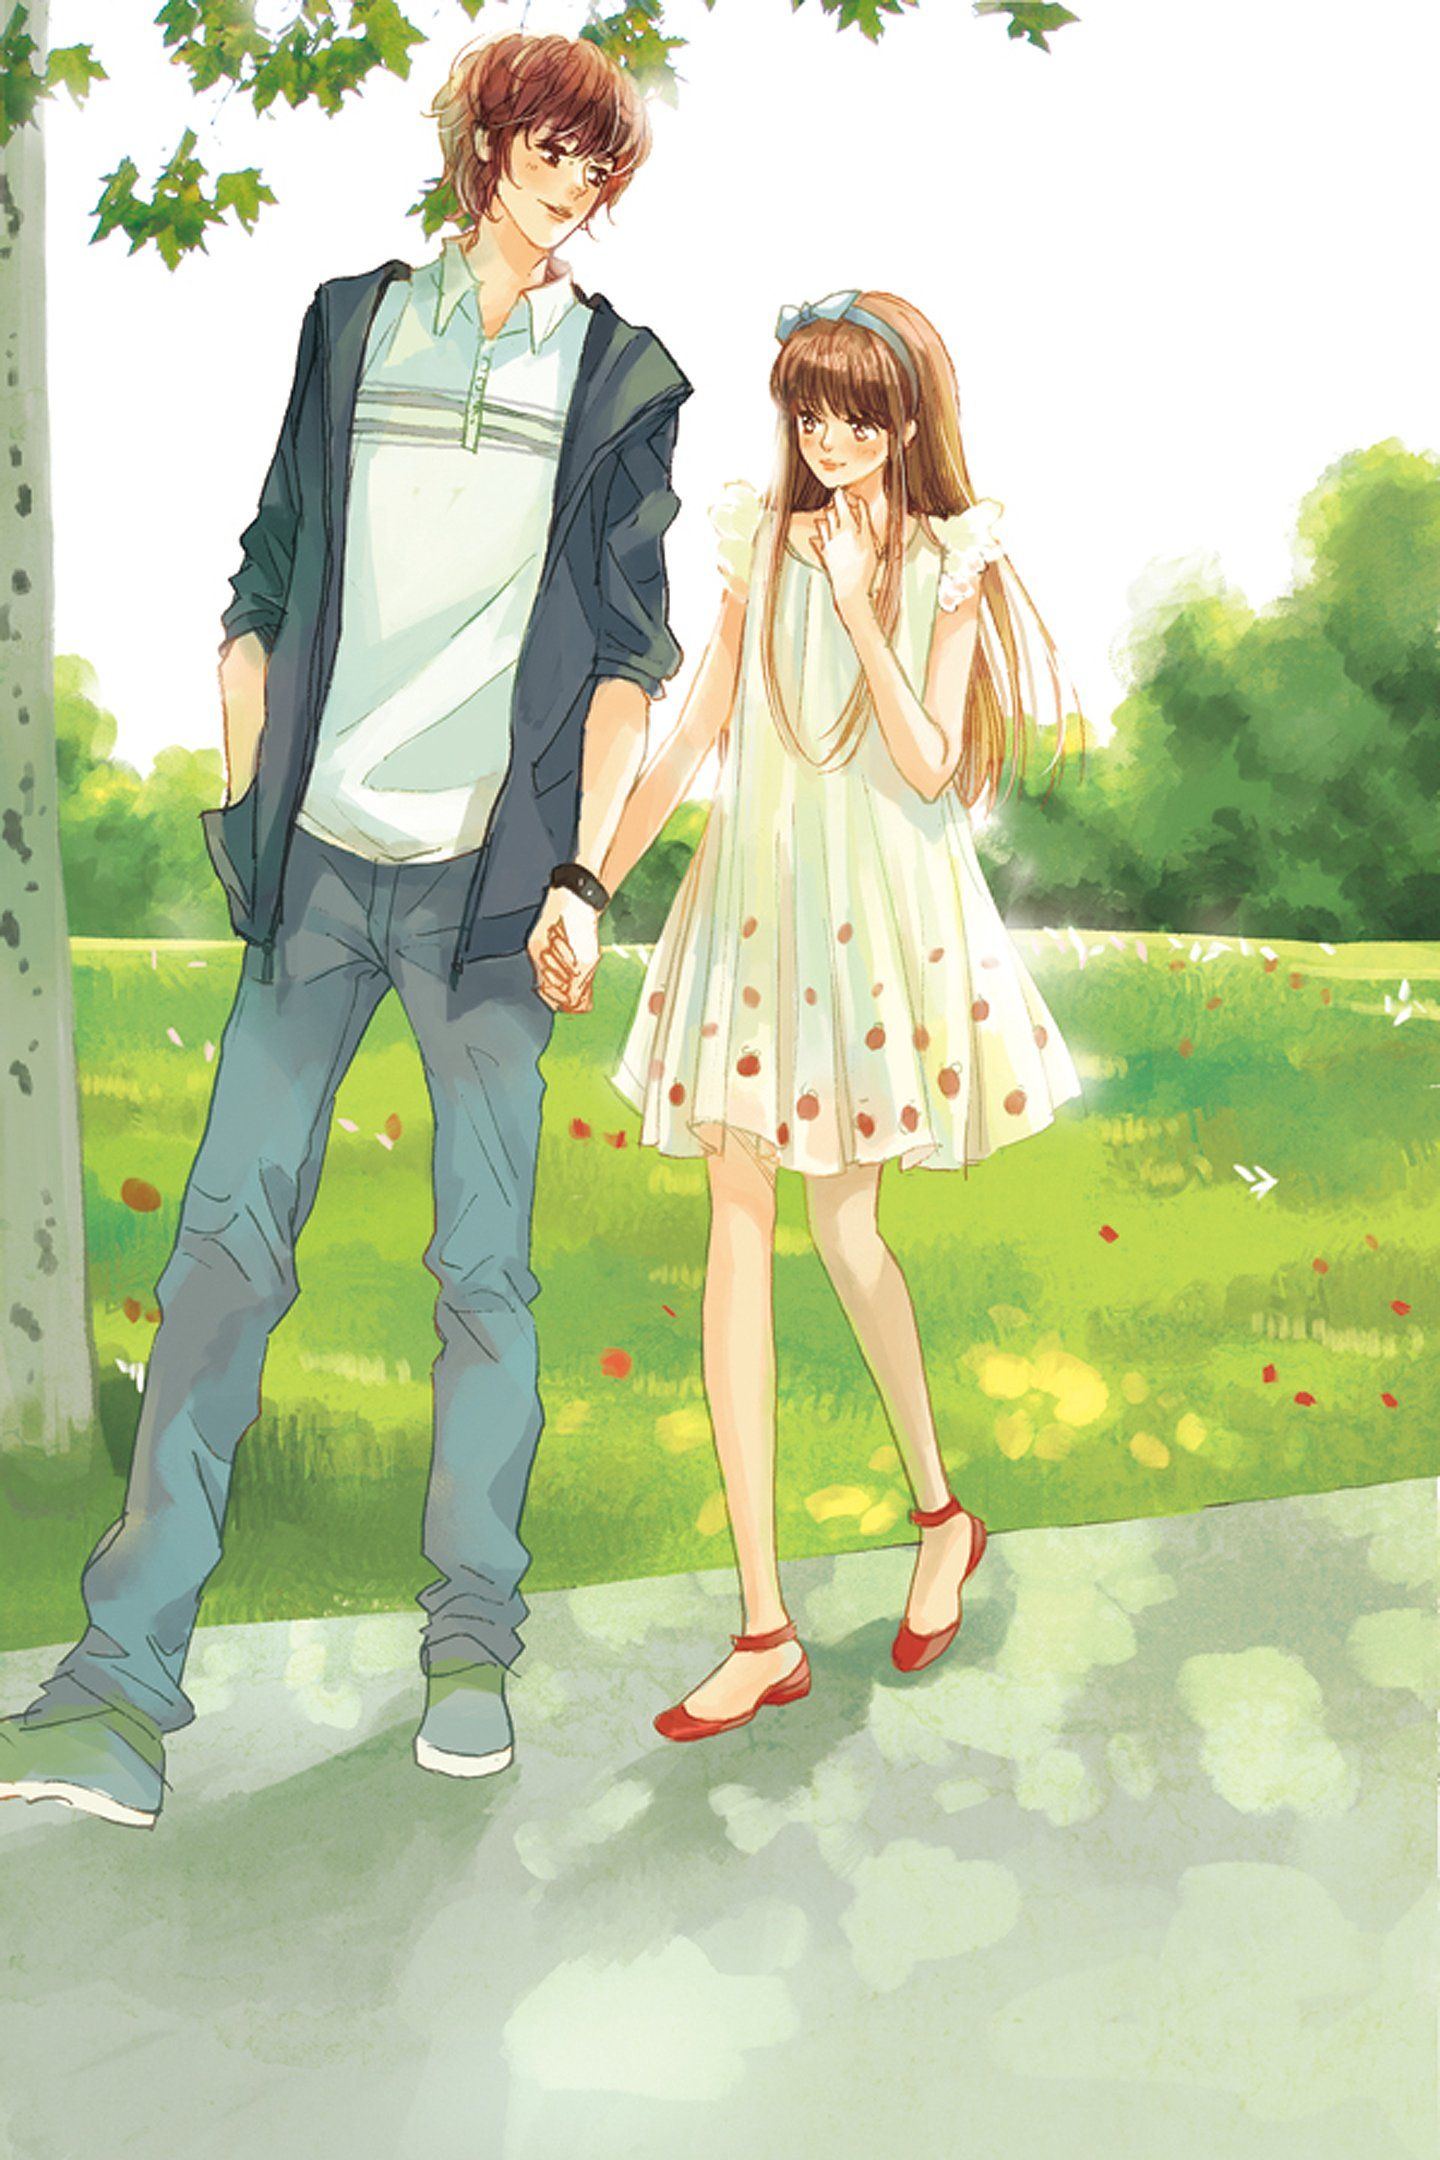 love, Anime, Couple, Boy, Girl, Tree, Red, Shoes, White, Dress